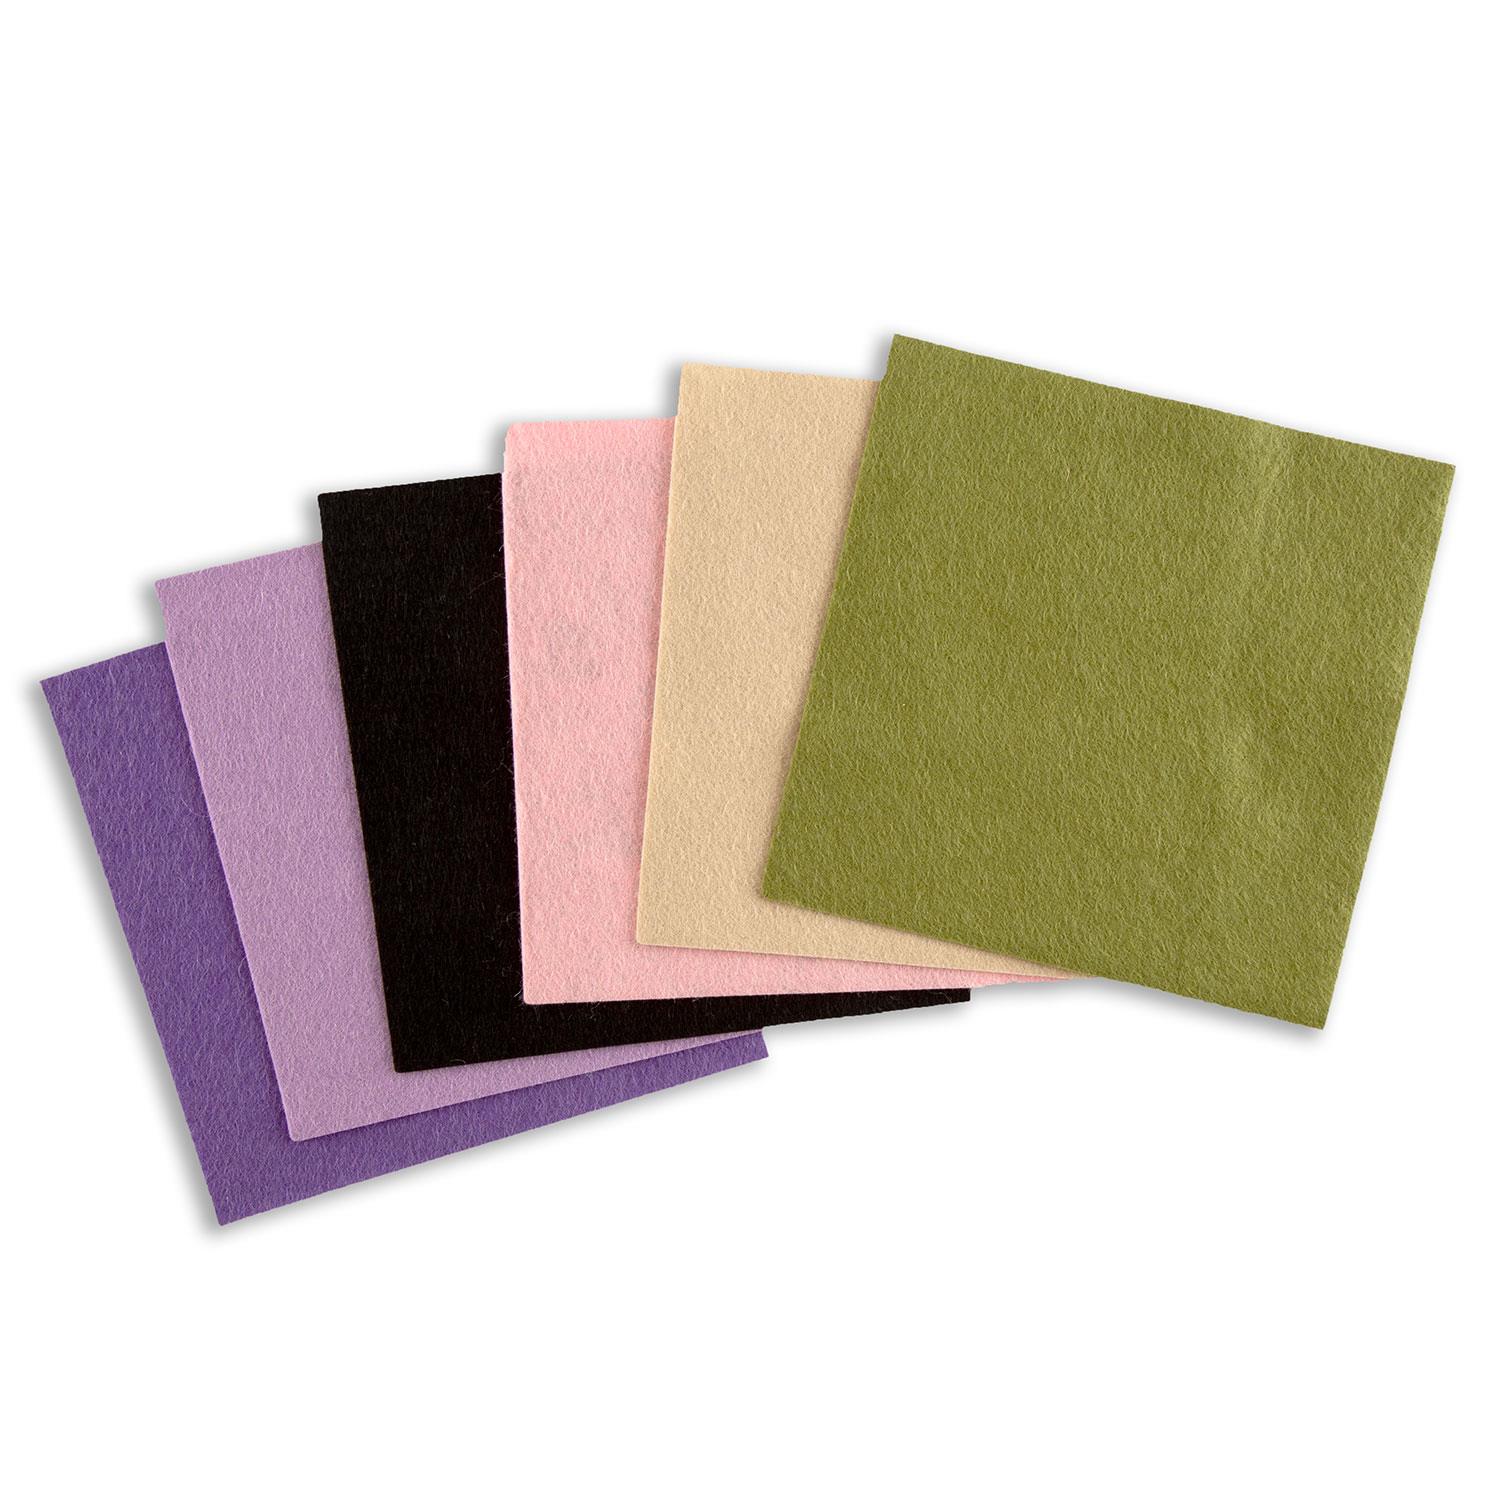 Felt by Clarity Pack of 6 Non-Adhesive Mixed Colour Felt 6x6" Squares Pick N Mix - Pick Any 2 - Funky Flower